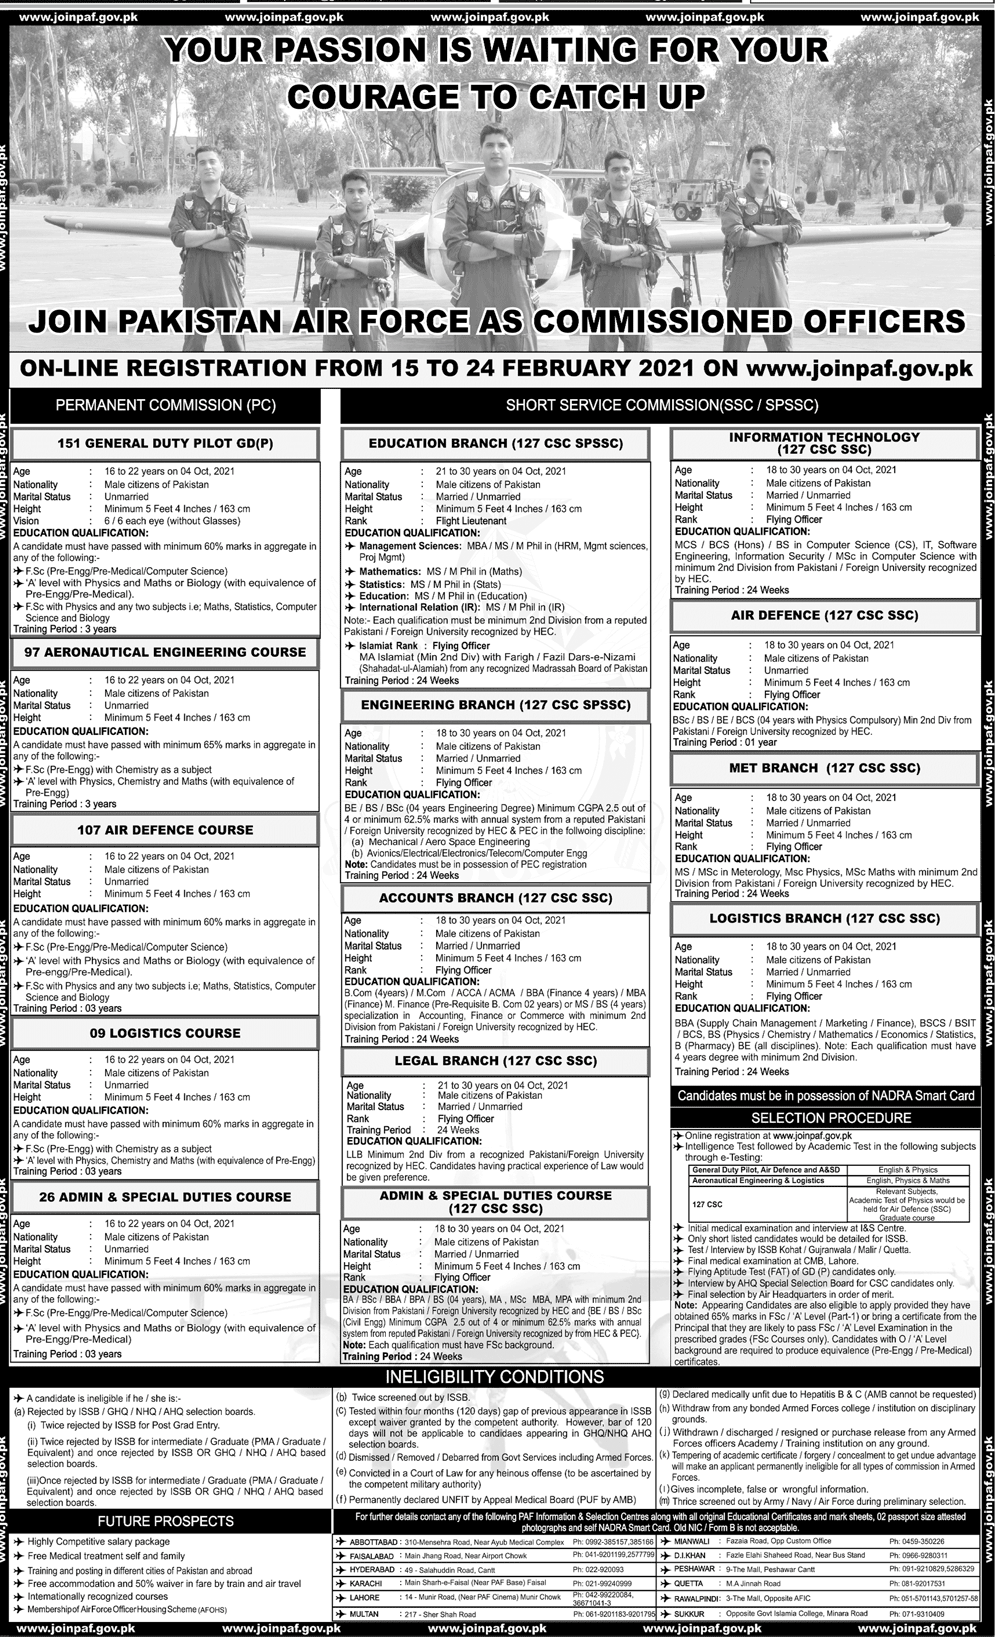 Join Pakistan Air Force as Commissioned Officers 2021